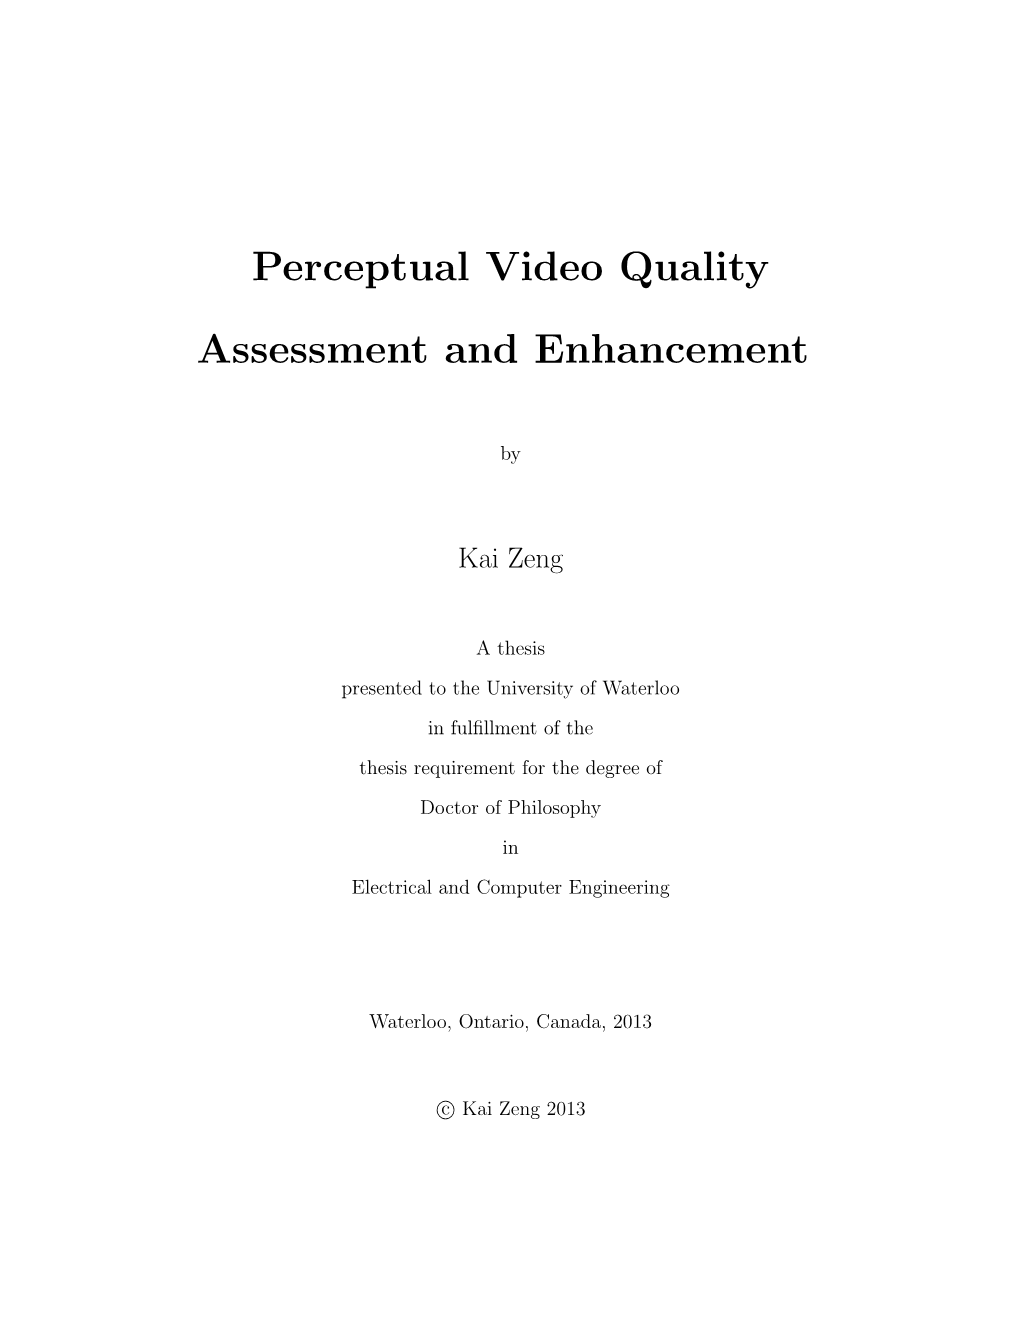 Quality Assessment and Enhancement of Video